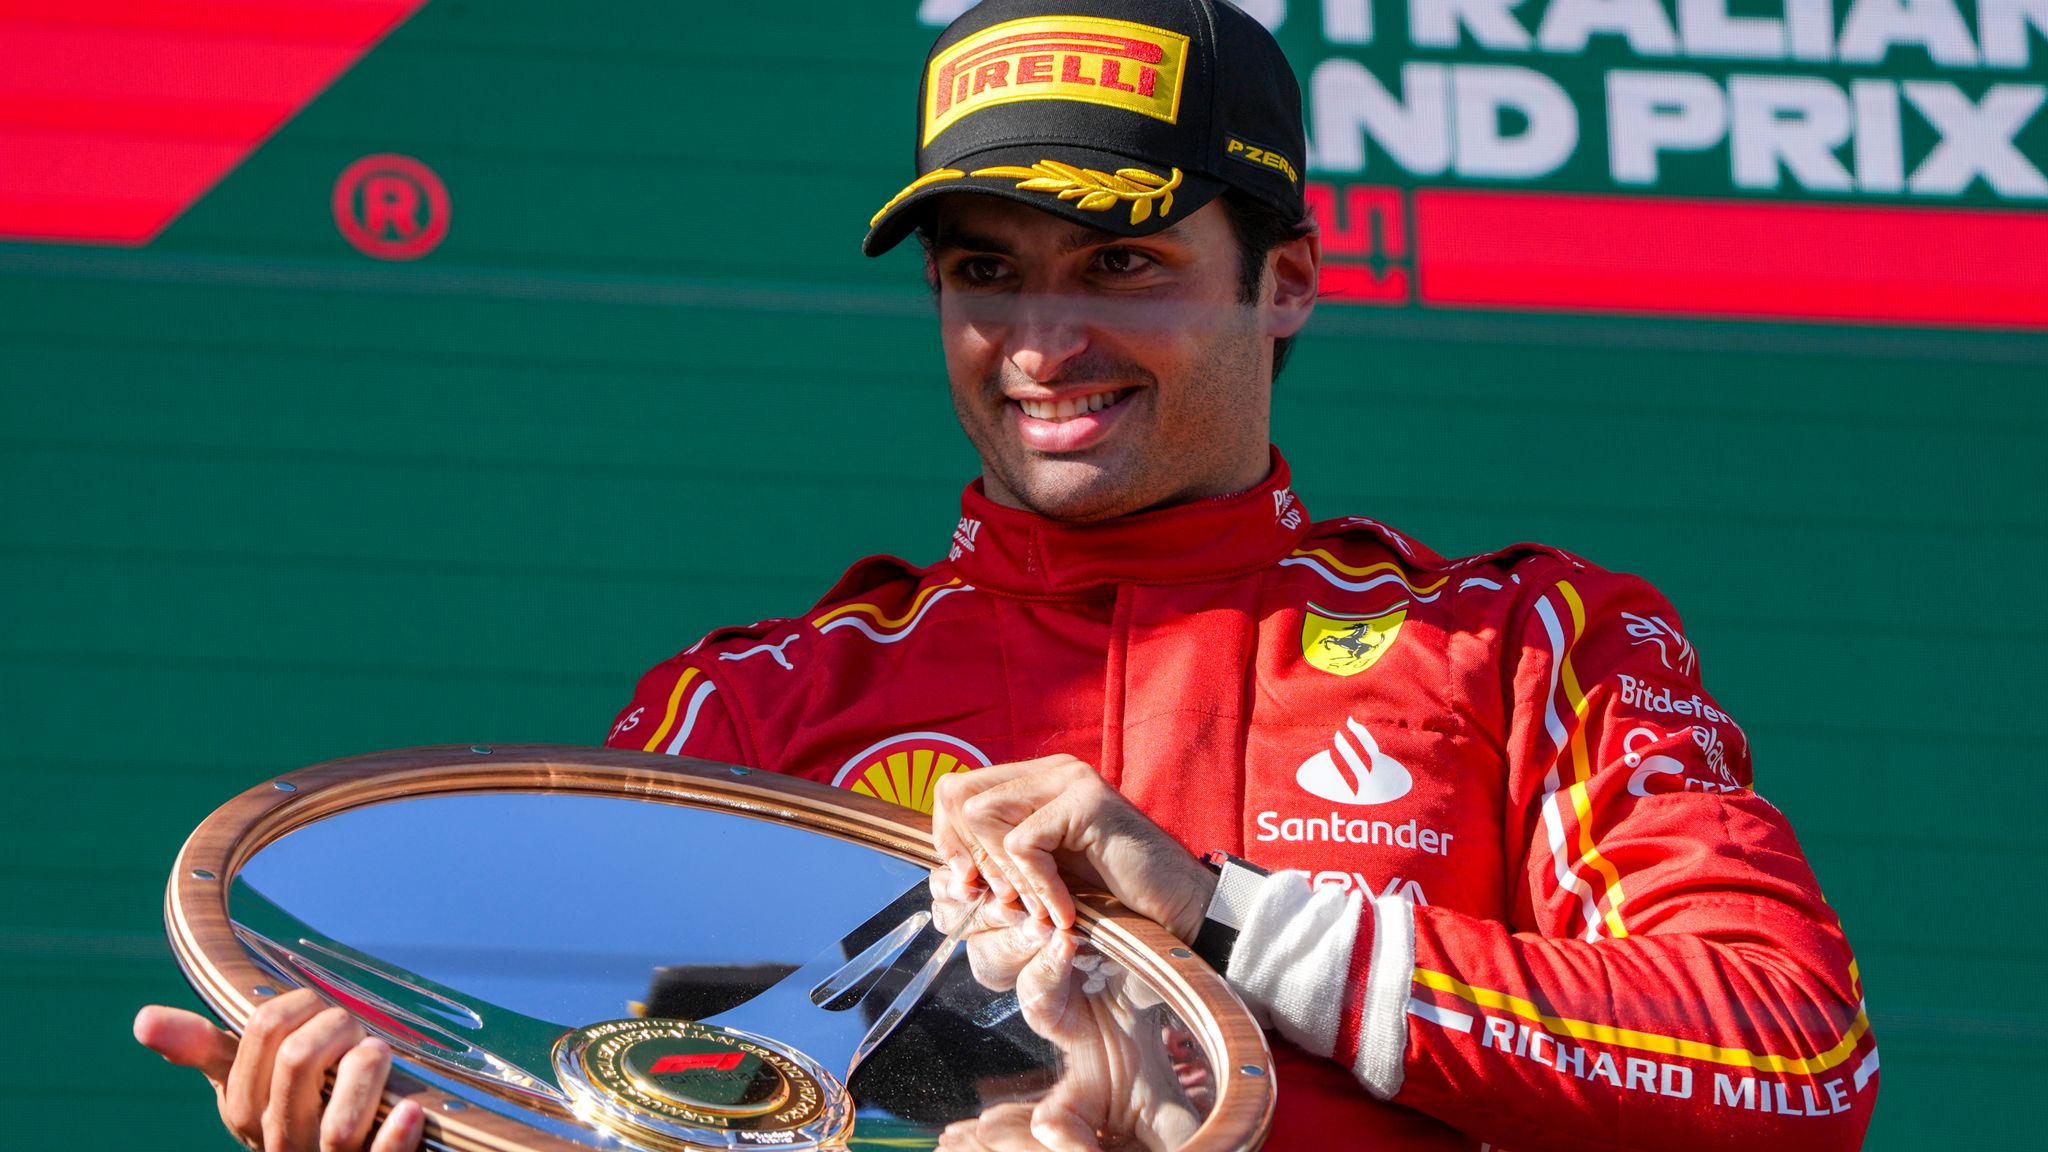 Australian GP: Carlos Sainz leads Ferrari one-two from Charles Leclerc after Max Verstappen streak ends with retirement | F1 News | Sky Sports